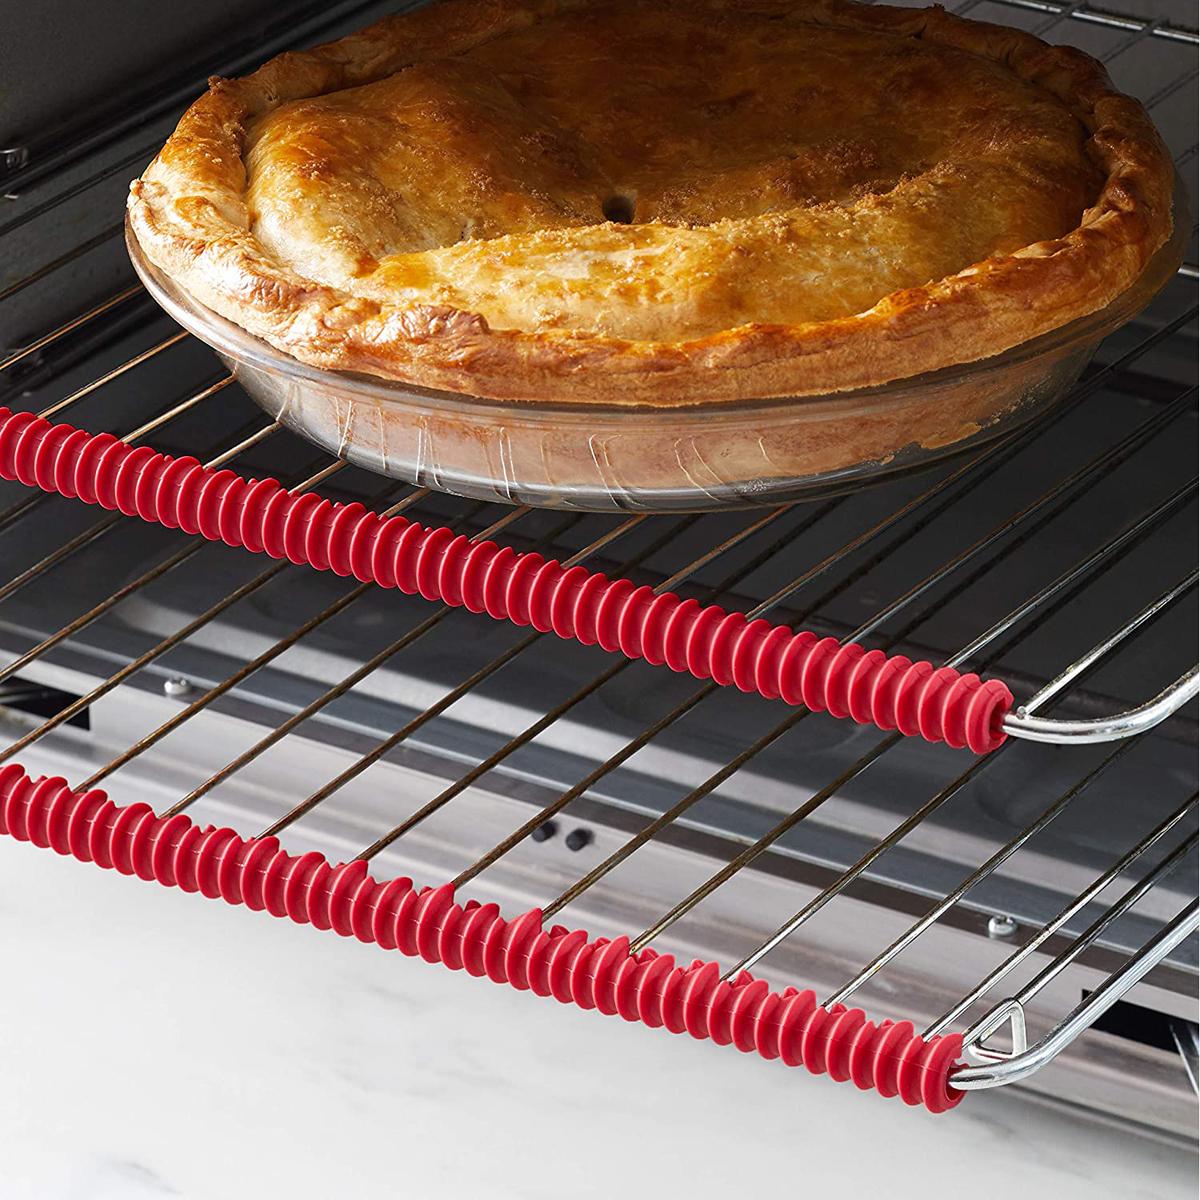 AmazonCommercial Heat Resistant Silicone Oven Rack Covers for $3.63